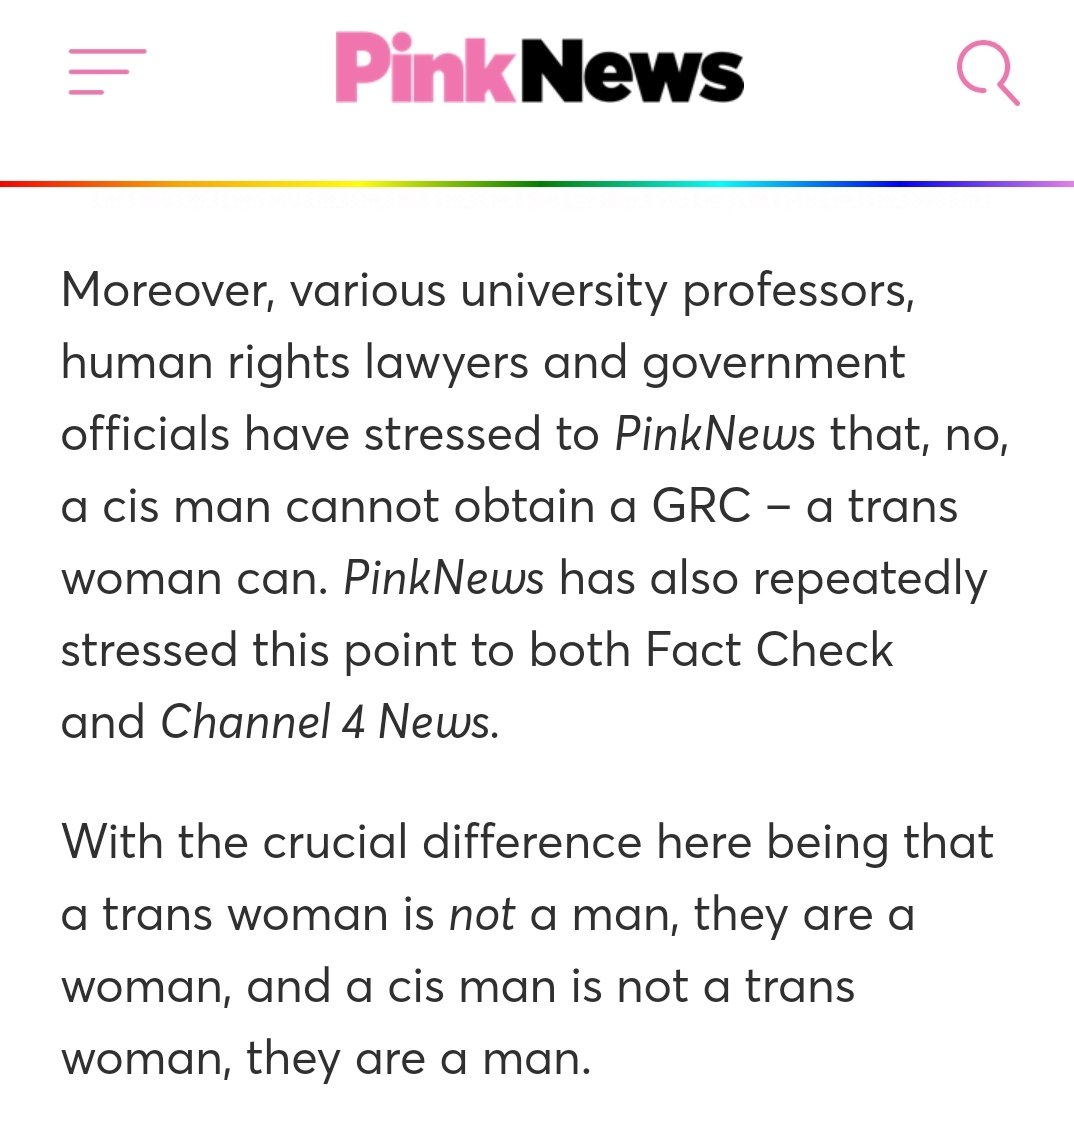 Citing  @JonathanCoopr and  @echrso he says only a "trans woman" can get a GRC, not a "cis man".